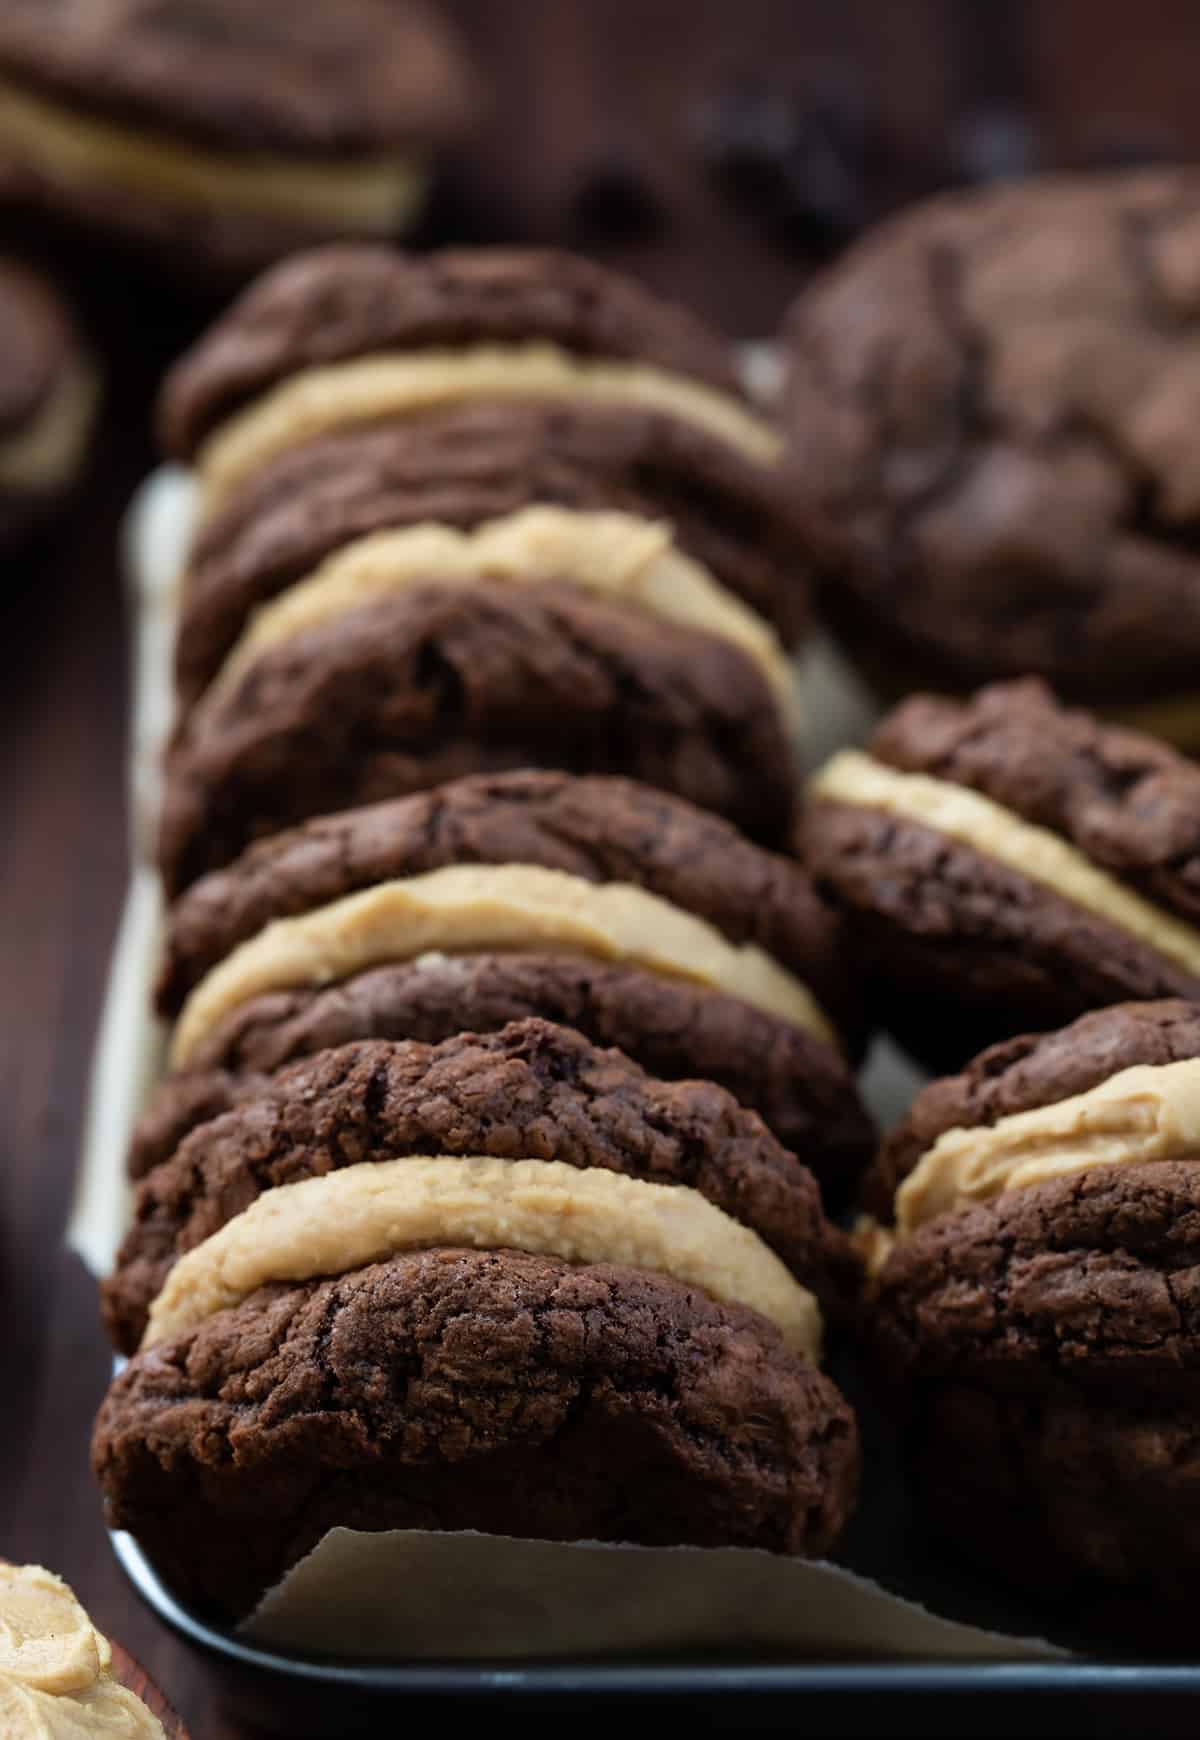 Rows of Chocolate Peanut Butter Sandwich Cookies in a Dish on a Dark Cutting Board.